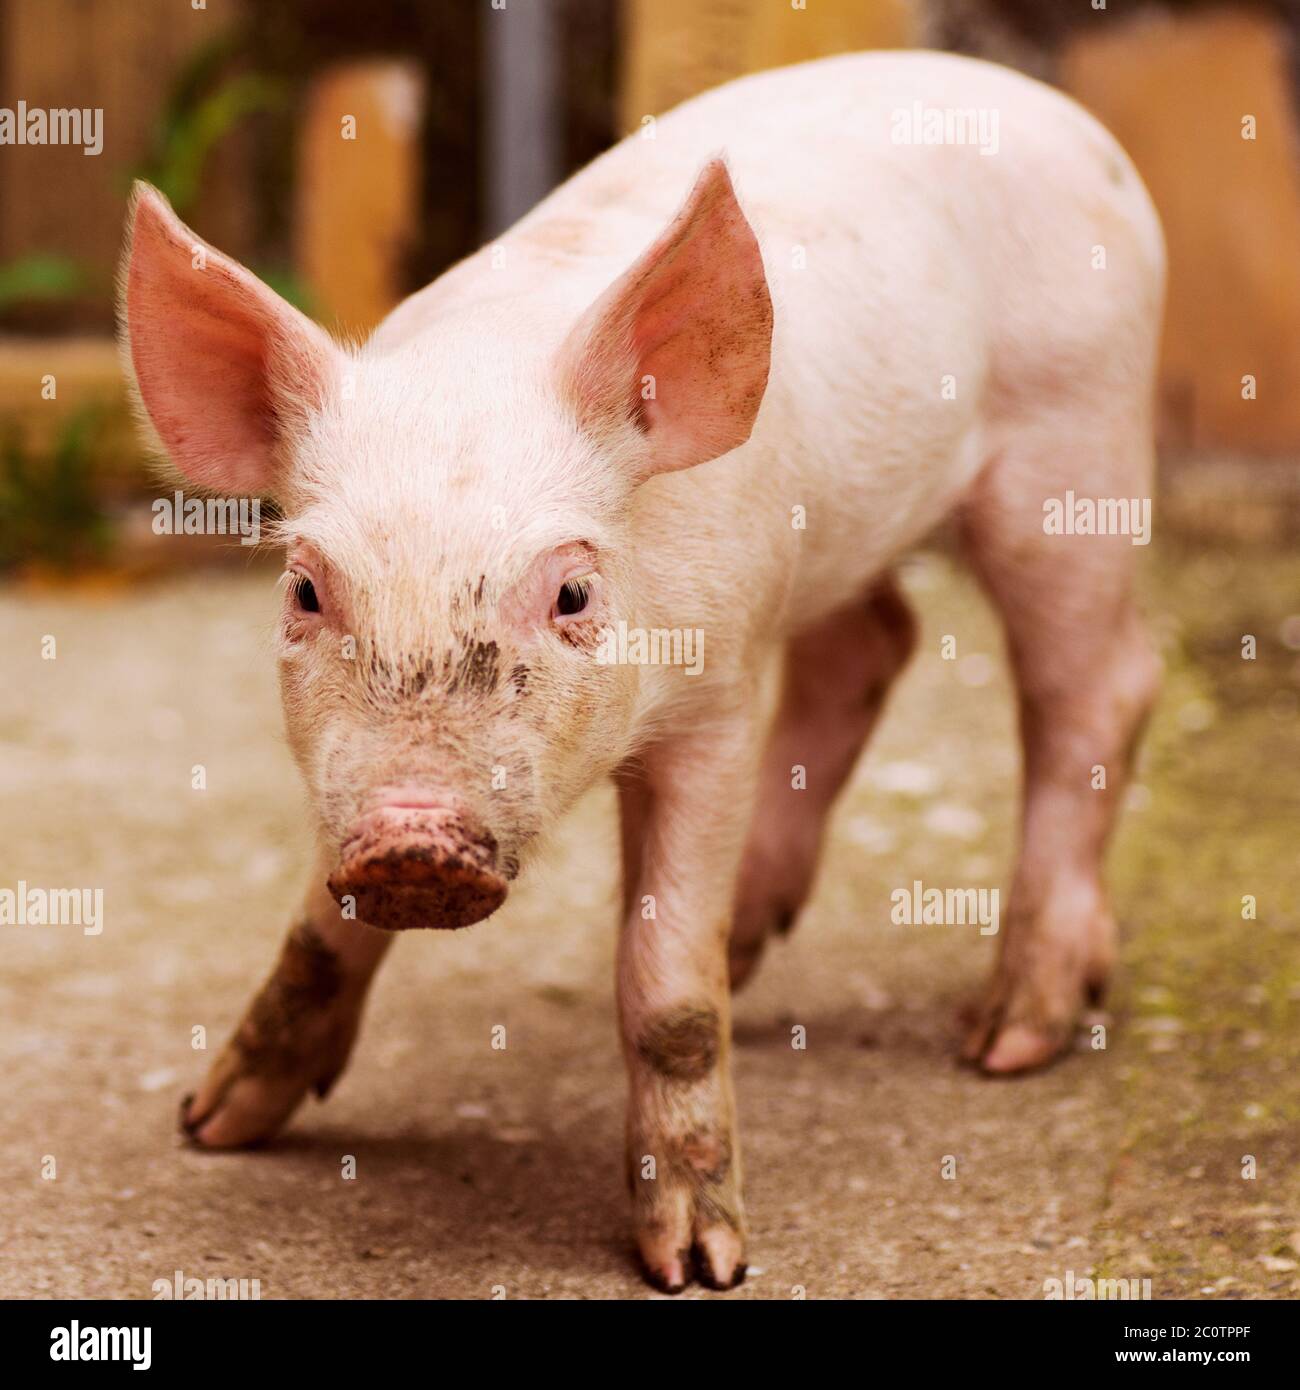 Animal portrait of standing cute little pink pig. Stock Photo